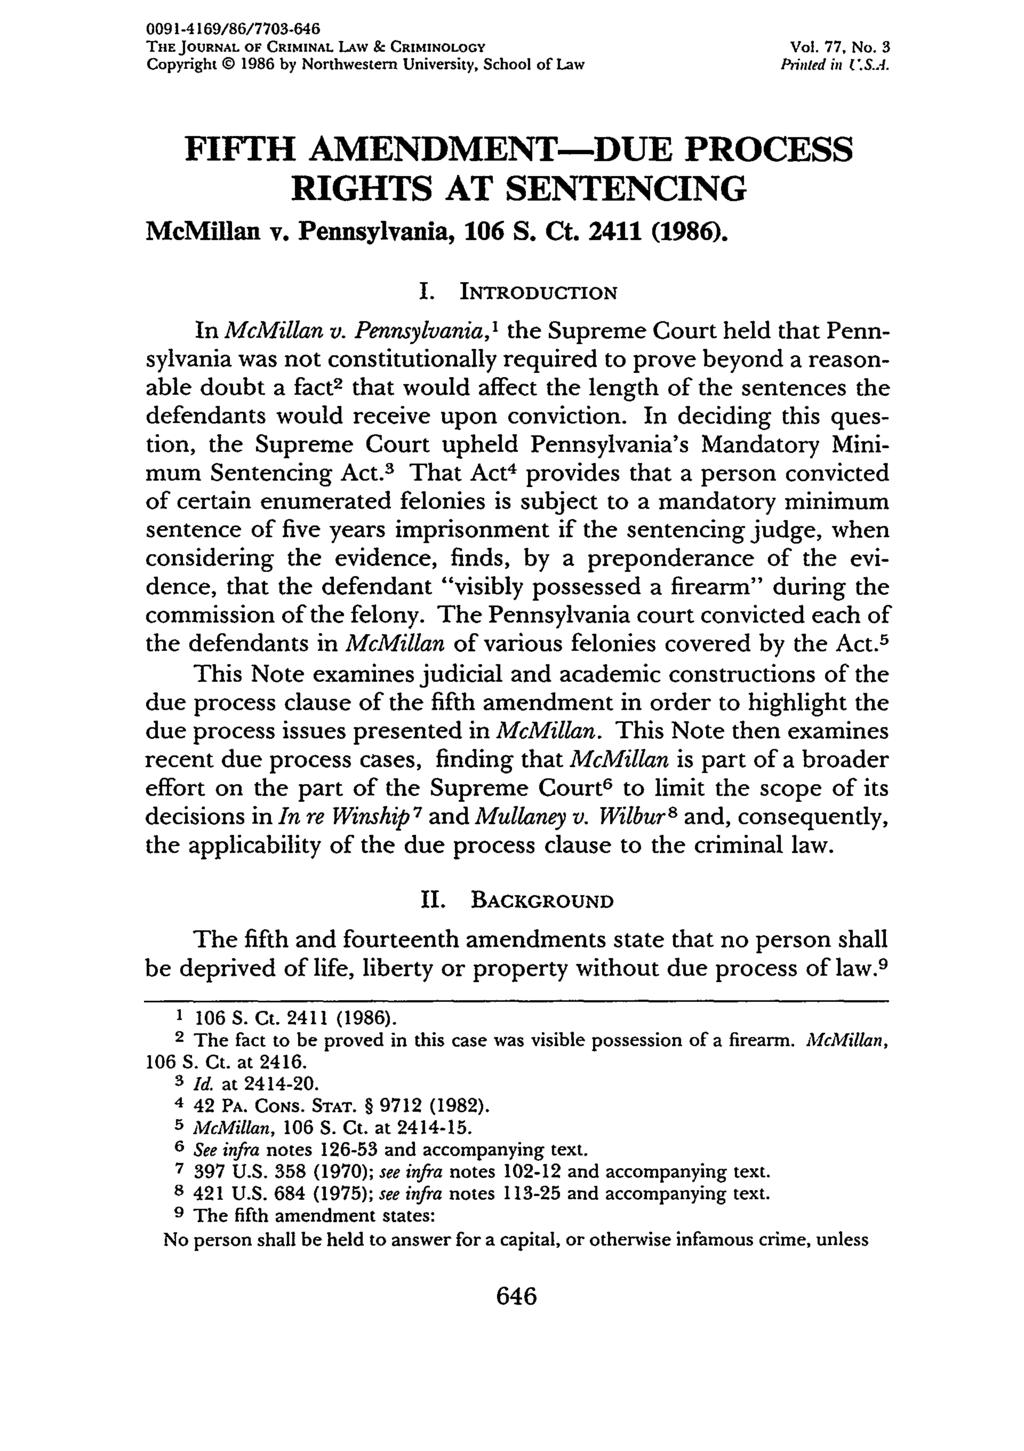 0091-4169/86/7703-646 THE JOURNAL OF CRIMINAL LAW & CRIMINOLOGY Vol. 77, No. 3 Copyright @ 1986 by Northwestern University, School of Law Printed in U.S. FIFTH AMENDMENT-DUE PROCESS RIGHTS AT SENTENCING McMillan v.